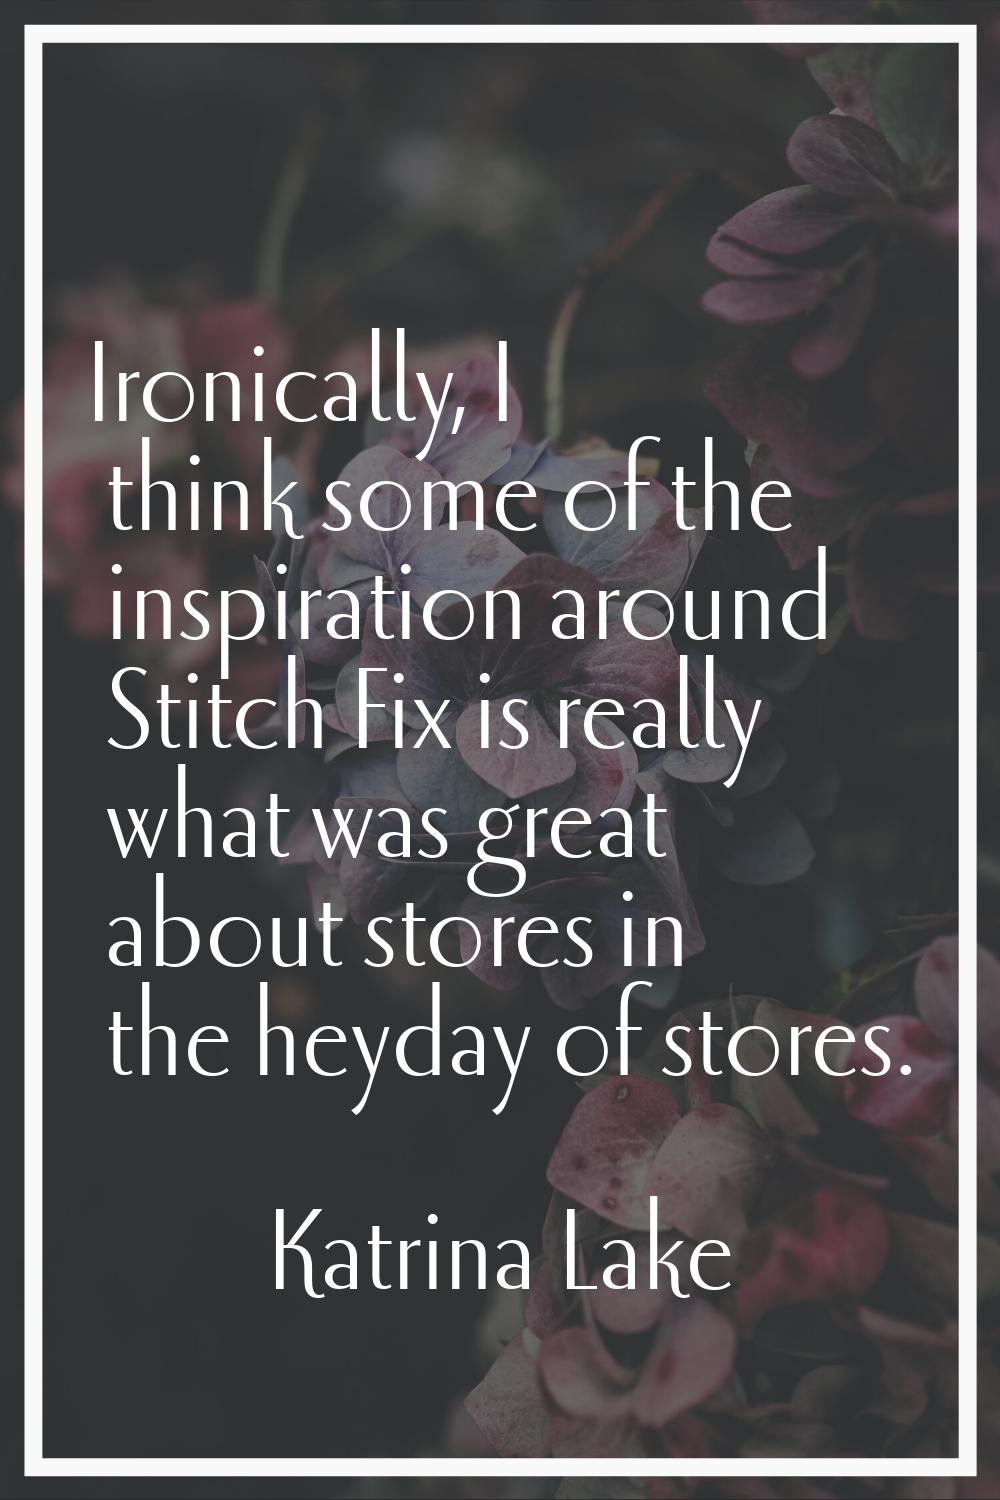 Ironically, I think some of the inspiration around Stitch Fix is really what was great about stores